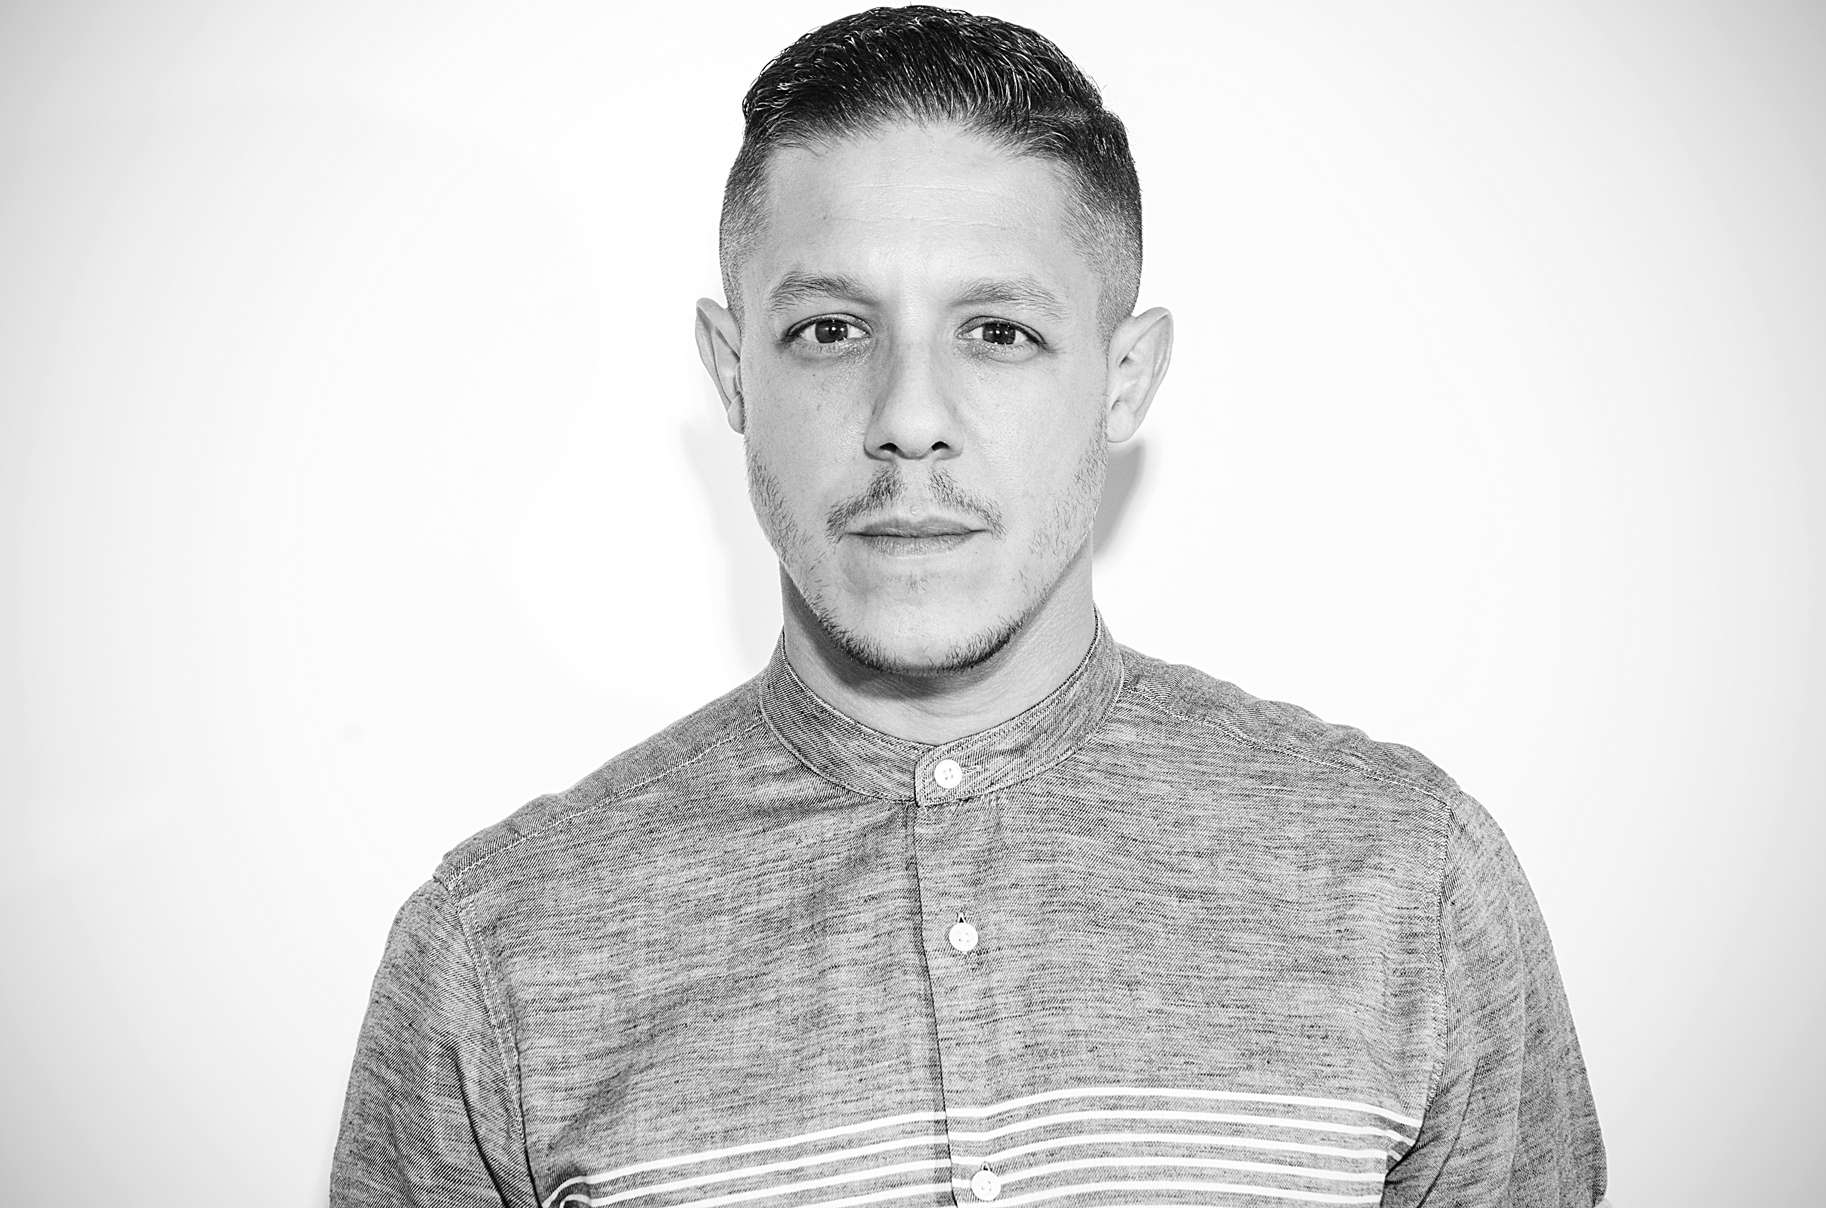 38 Facts About Theo Rossi - Facts.net